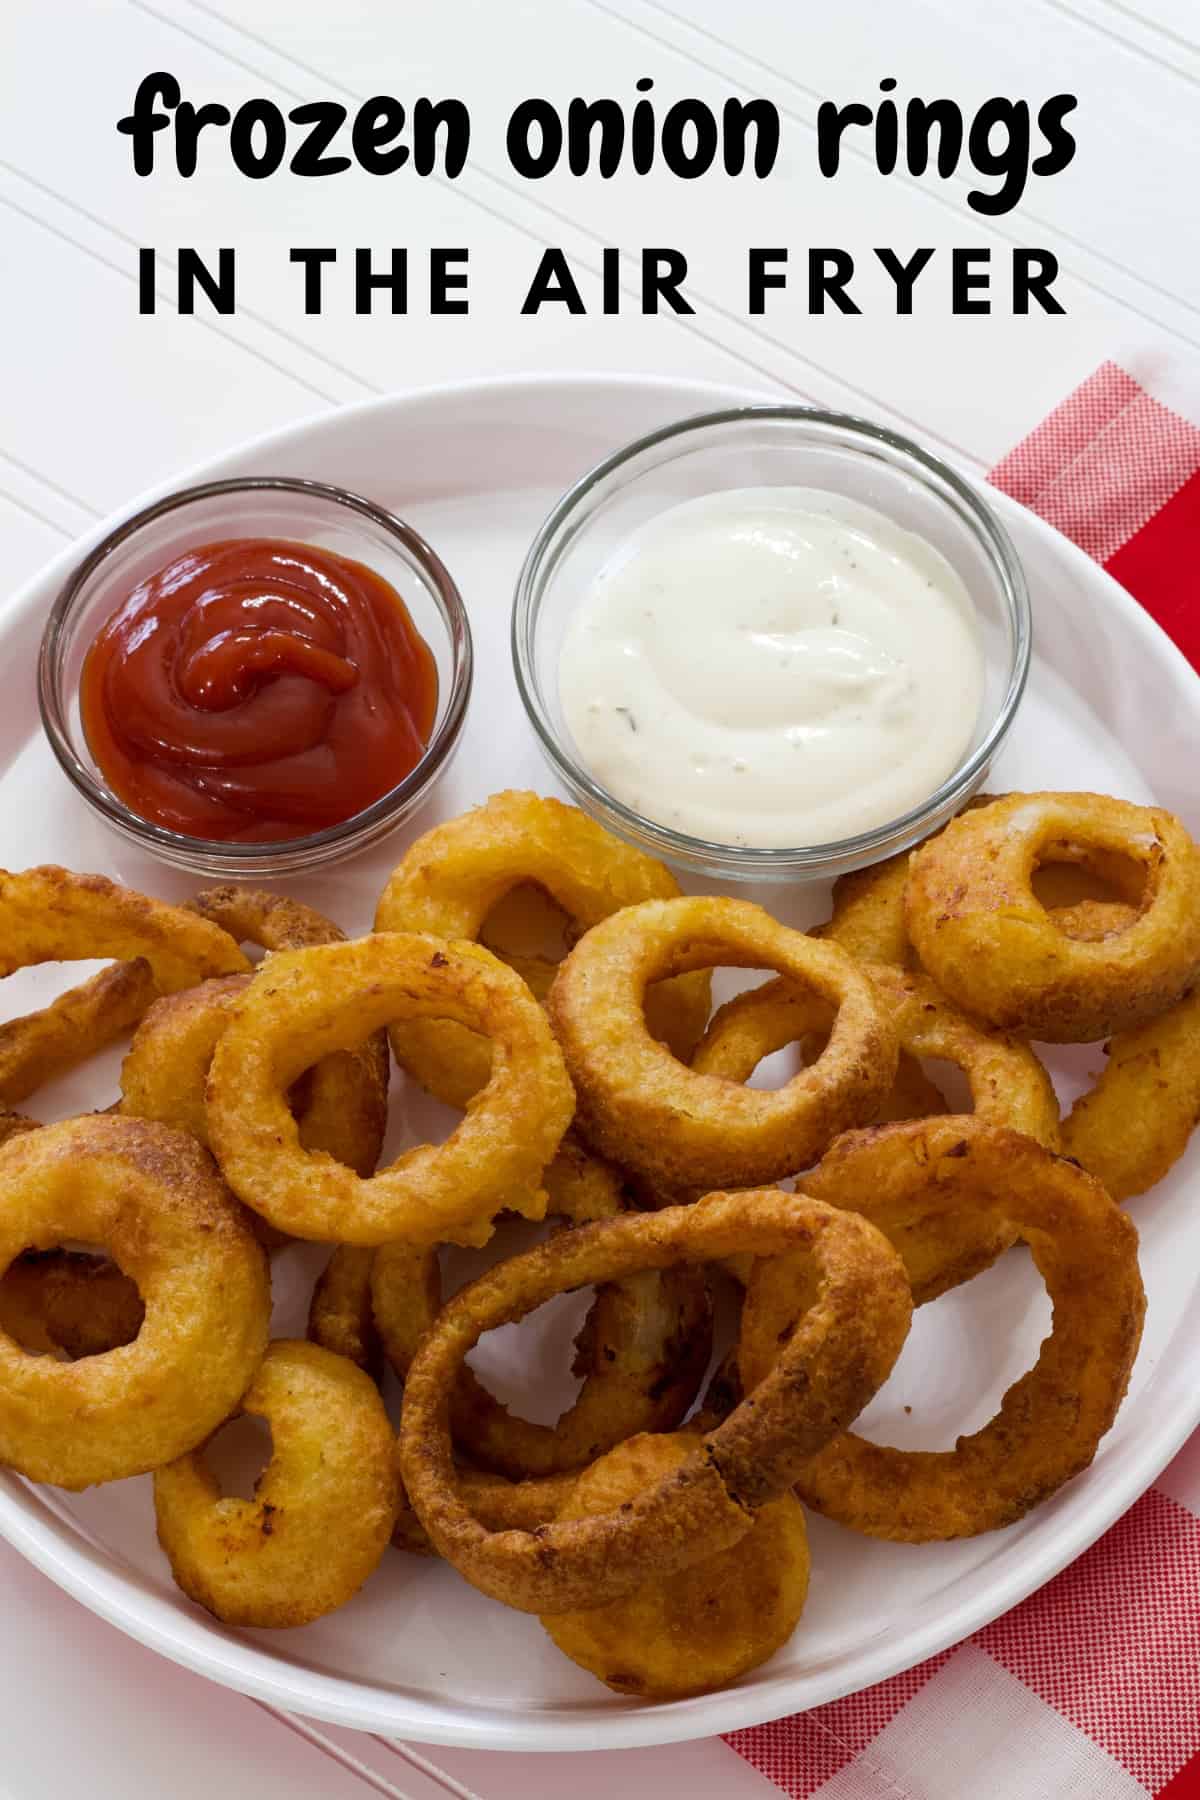 Frozen Onion Rings in the Air Fryer - Cook an entire bag of onion rings perfectly browned and crispy at once without preheating the air fryer. via @mindyscookingobsession